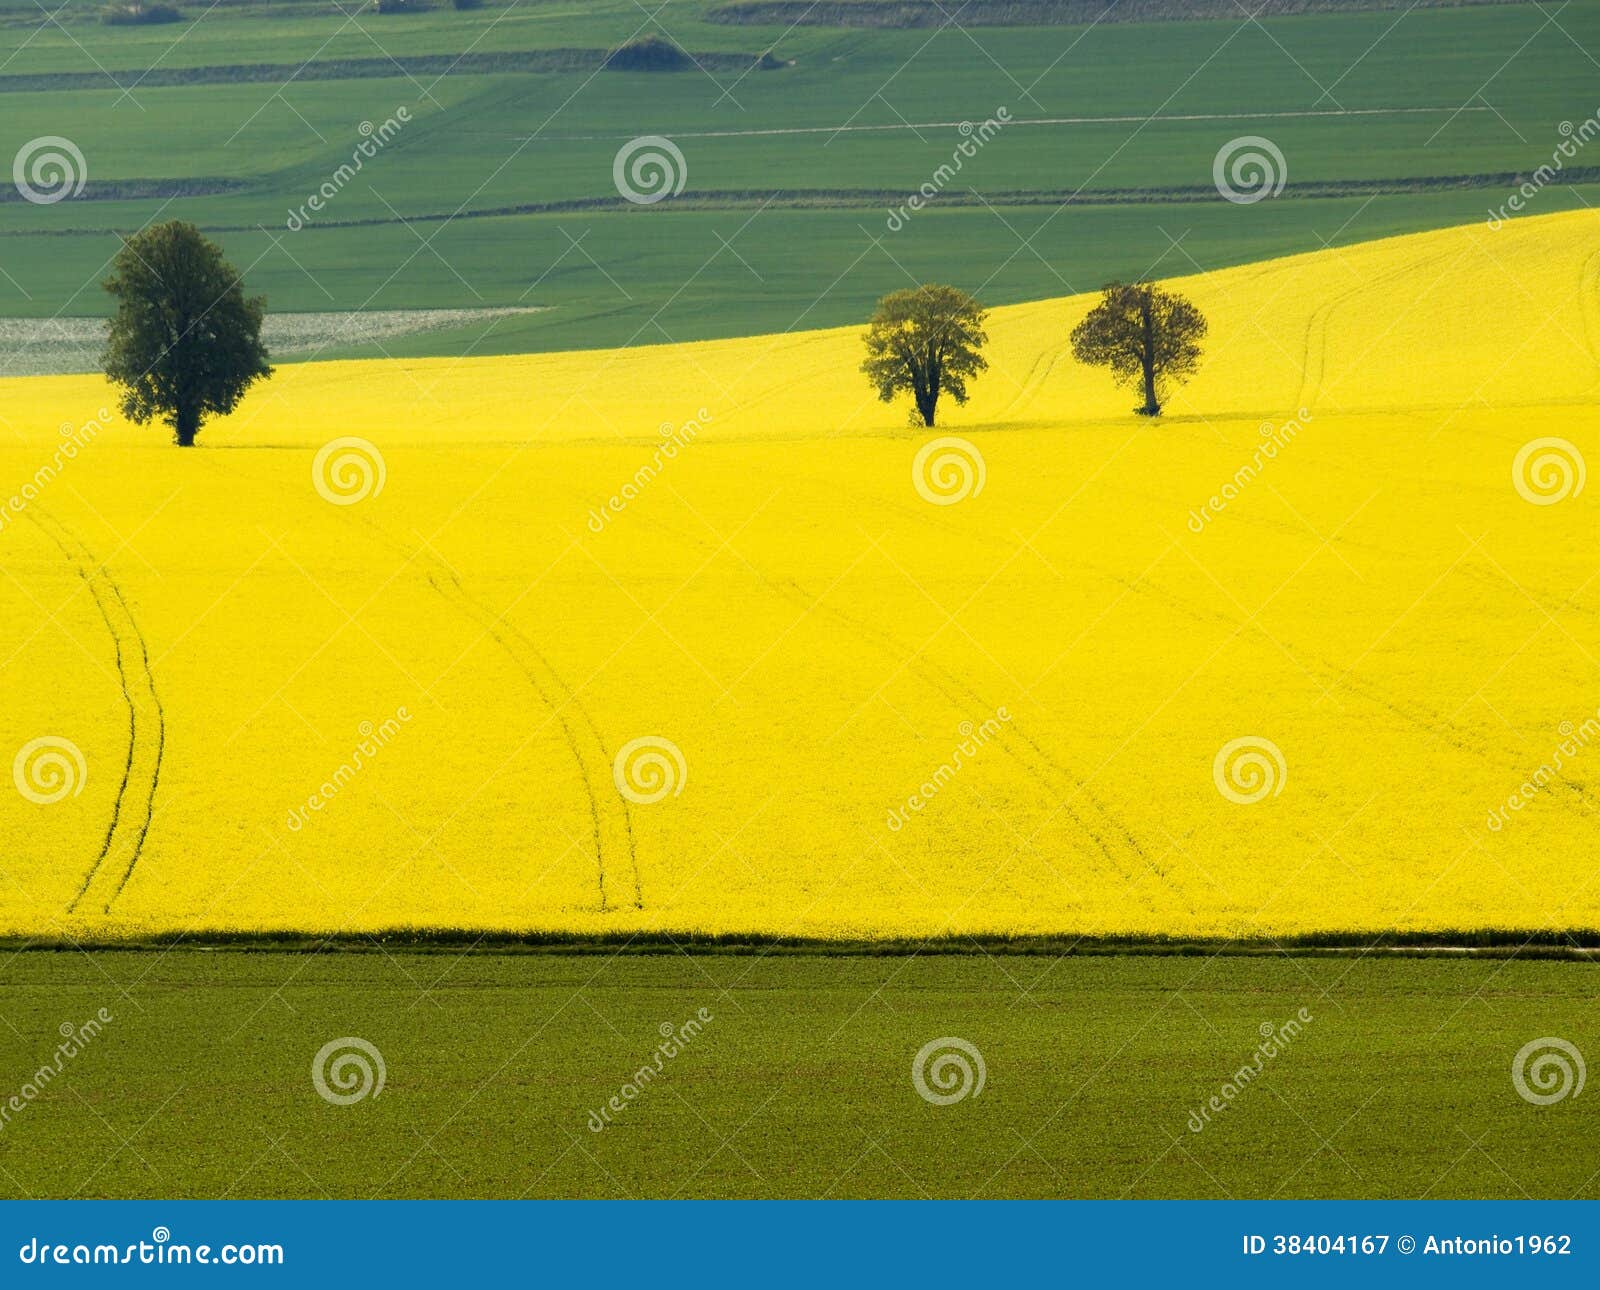 grafic forms a yellow and green field.